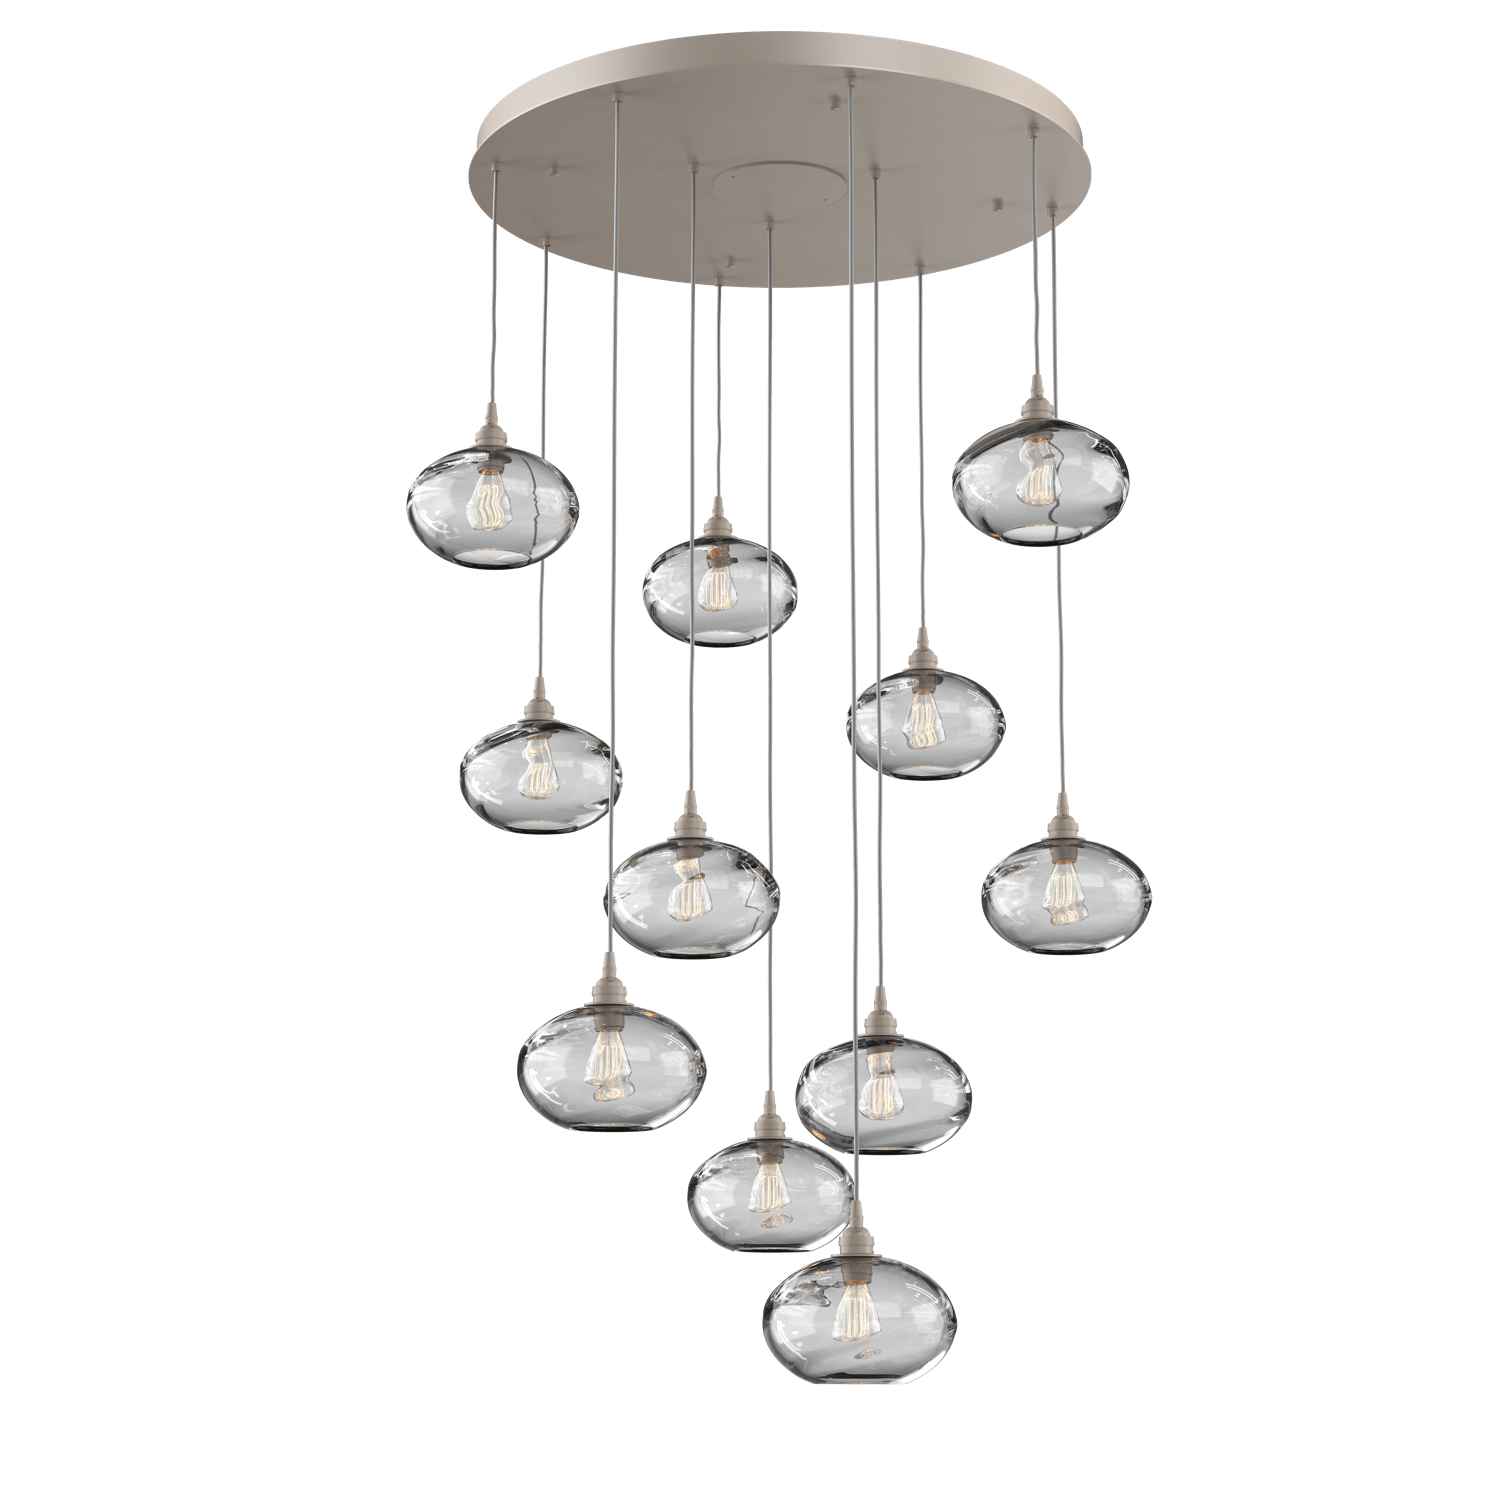 CHB0036-11-BS-OC-Hammerton-Studio-Optic-Blown-Glass-Coppa-11-light-round-pendant-chandelier-with-metallic-beige-silver-finish-and-optic-clear-blown-glass-shades-and-incandescent-lamping